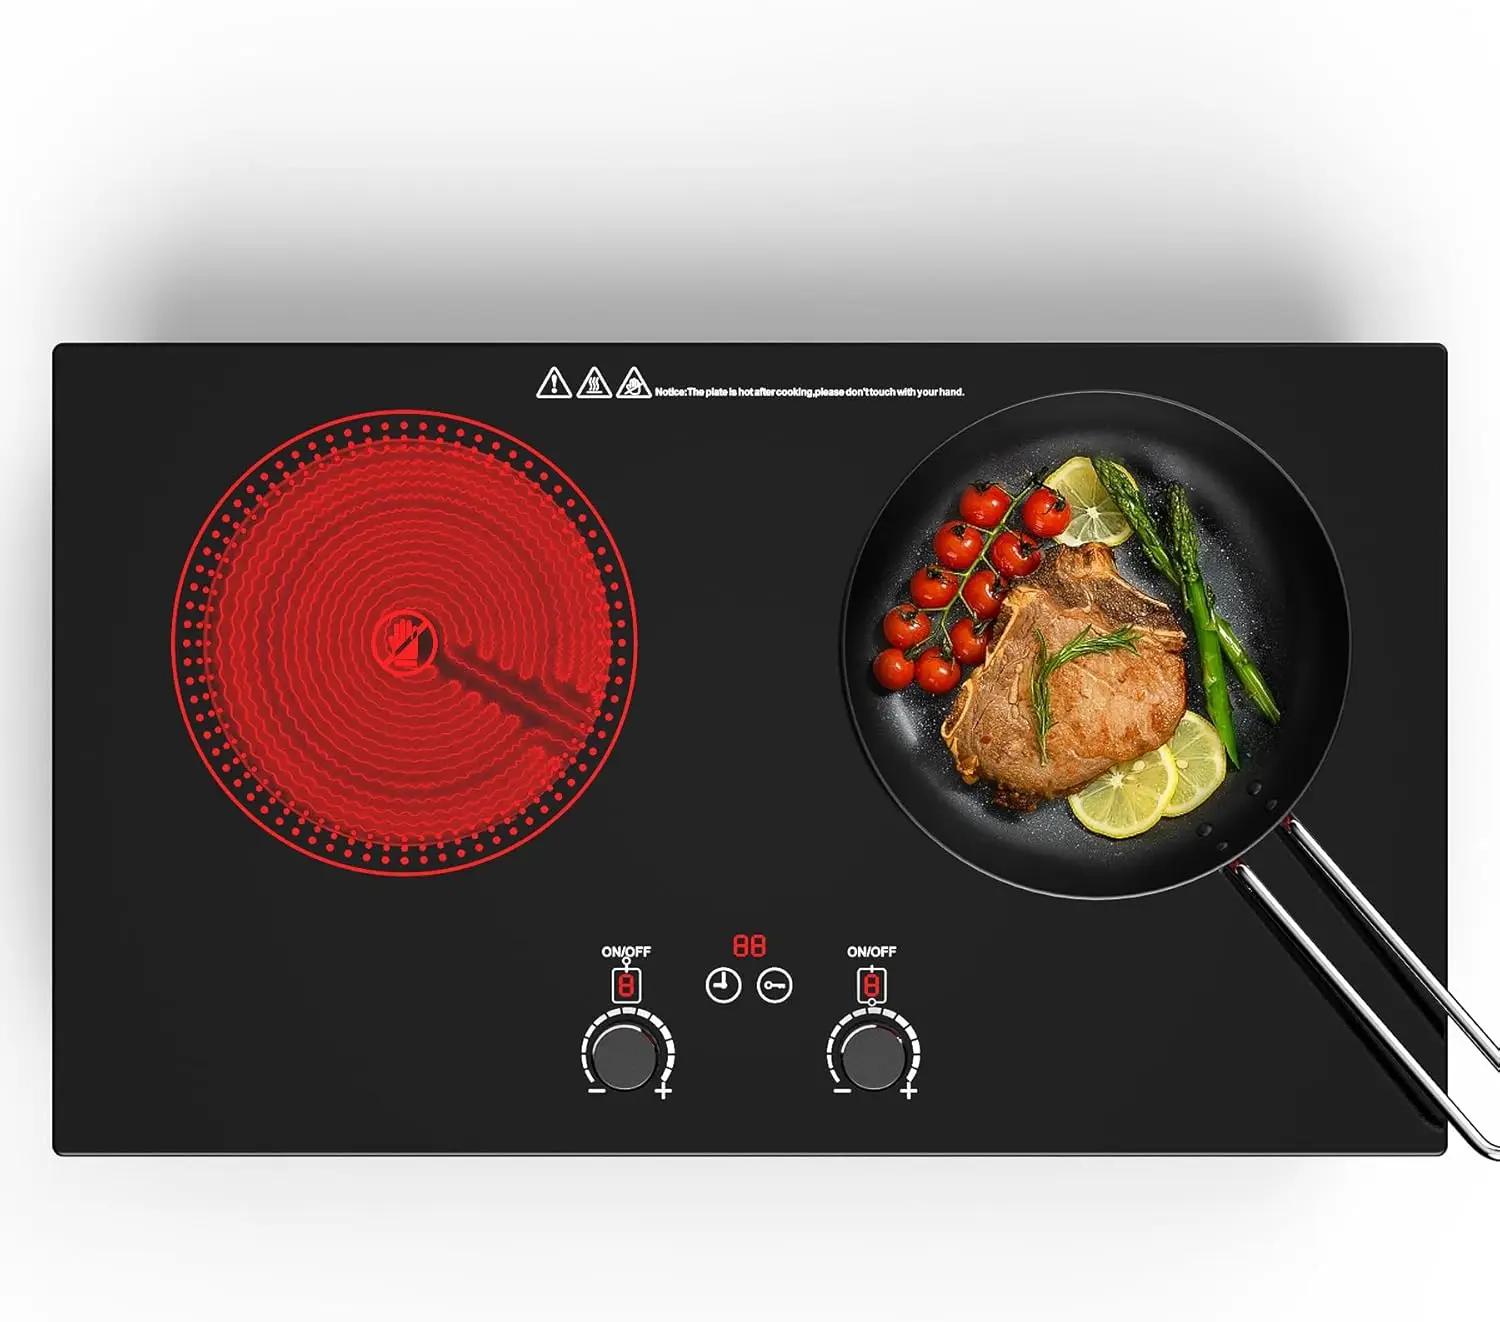 

Electric Cooktop,110V 2400W Electric Stove Top with LCD Touch and Knob Control,Built-in and Countertop 2 Burner Electric